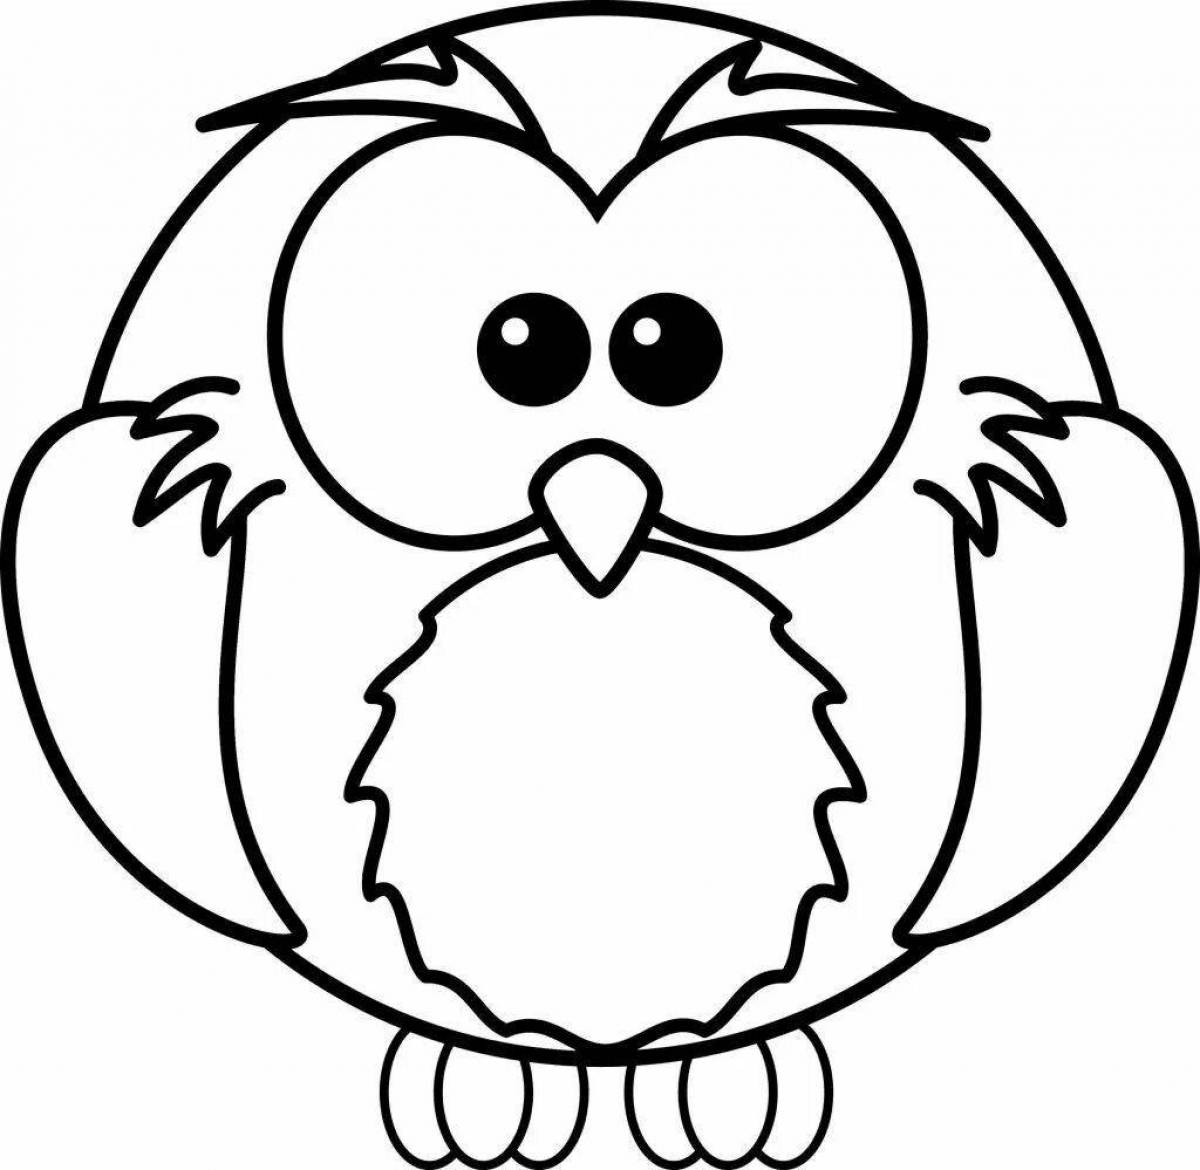 Fairy owl coloring for kids